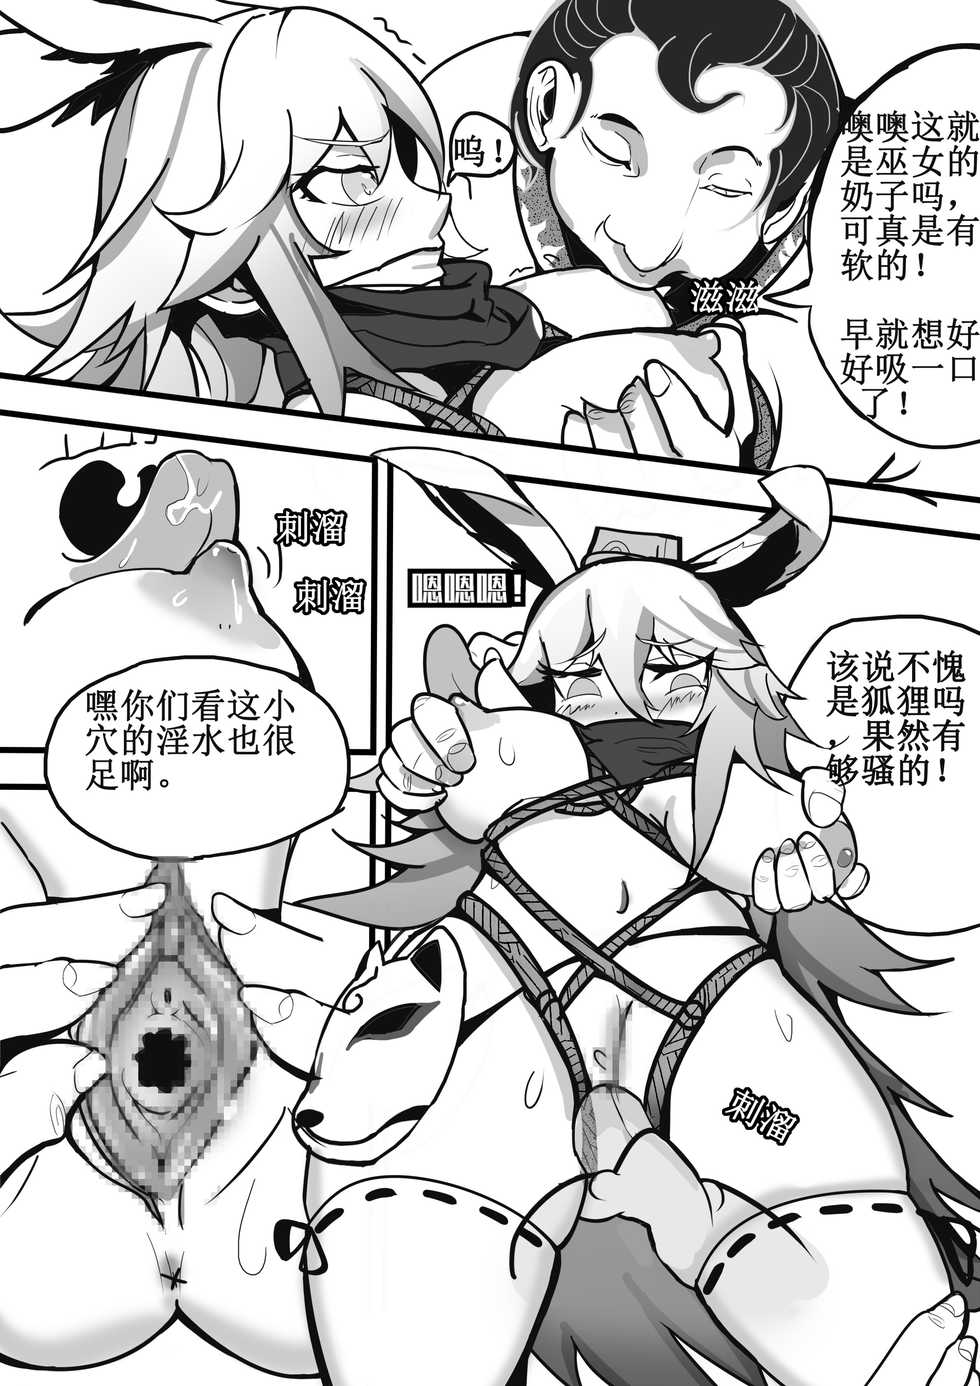 (White Bank) Collapse 1-6 (Honkai Impact 3rd) [Chinese] - Page 7